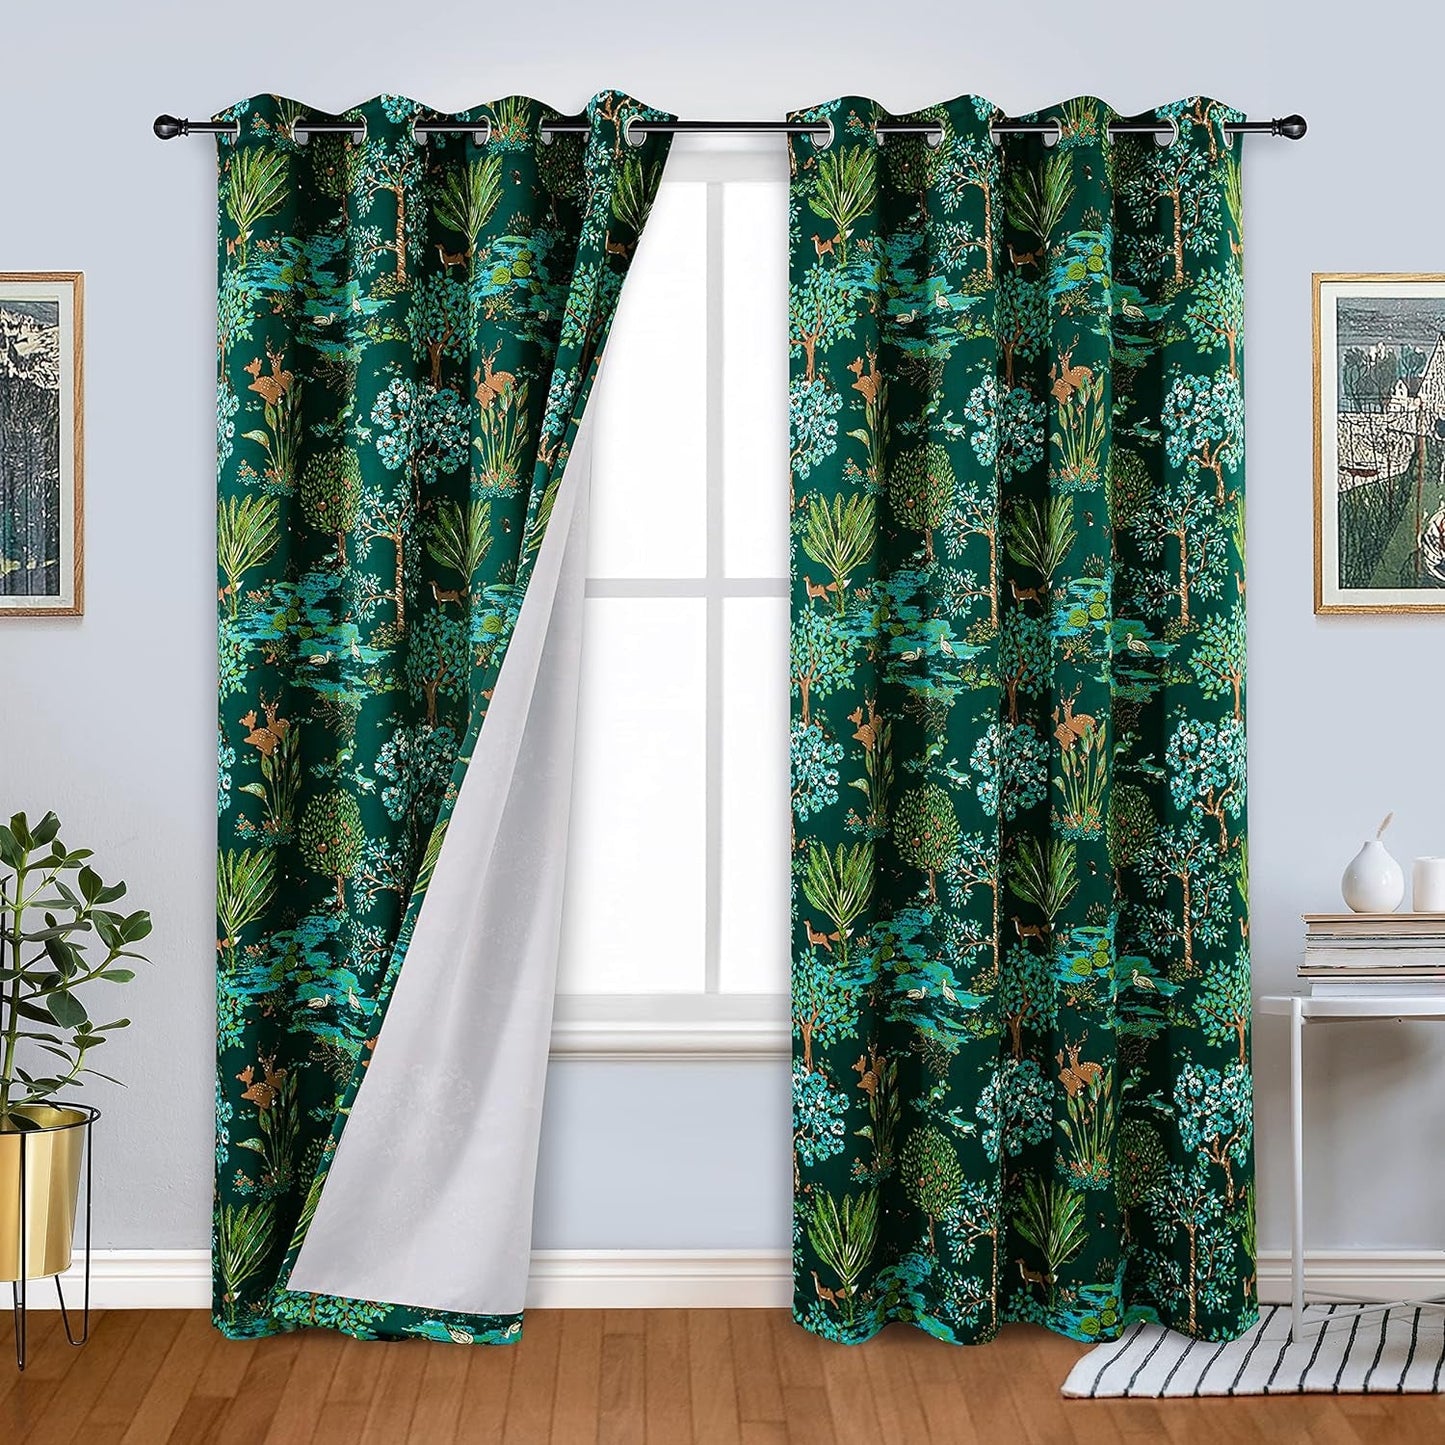 Driftaway Animal Forest Curtains for Bedroom 84 Inch Room Darkening Unlined Tropical Jungle Thermal Window Drapes Watercolor Woodland Tree Pattern Grommet 2 Panels